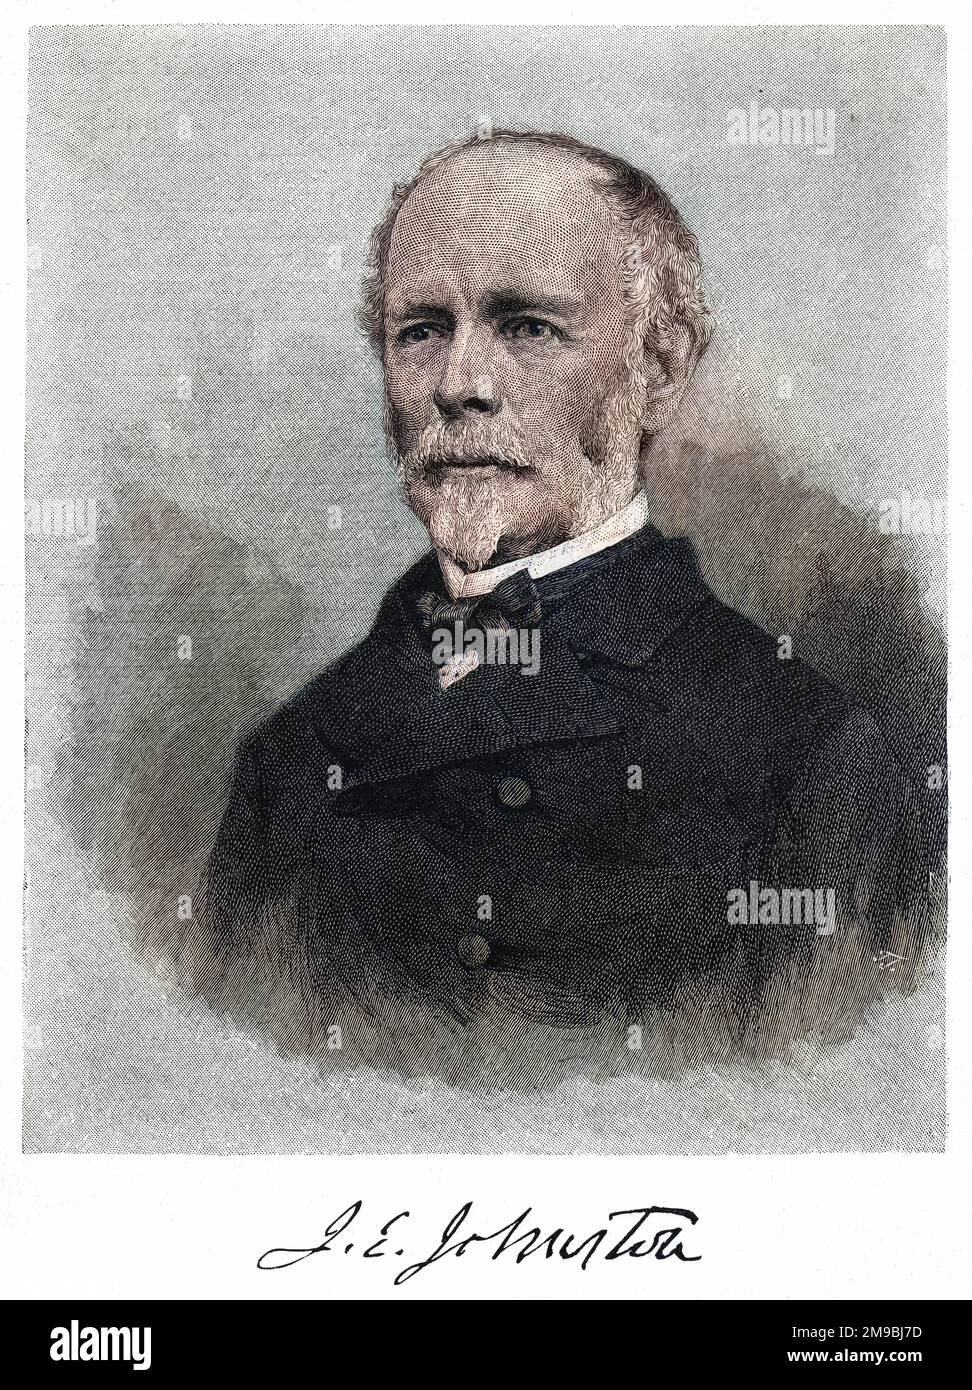 JOSEPH EGGLESTON JOHNSTON American military commander in the Confederate Army, subsequently a statesman. Stock Photo